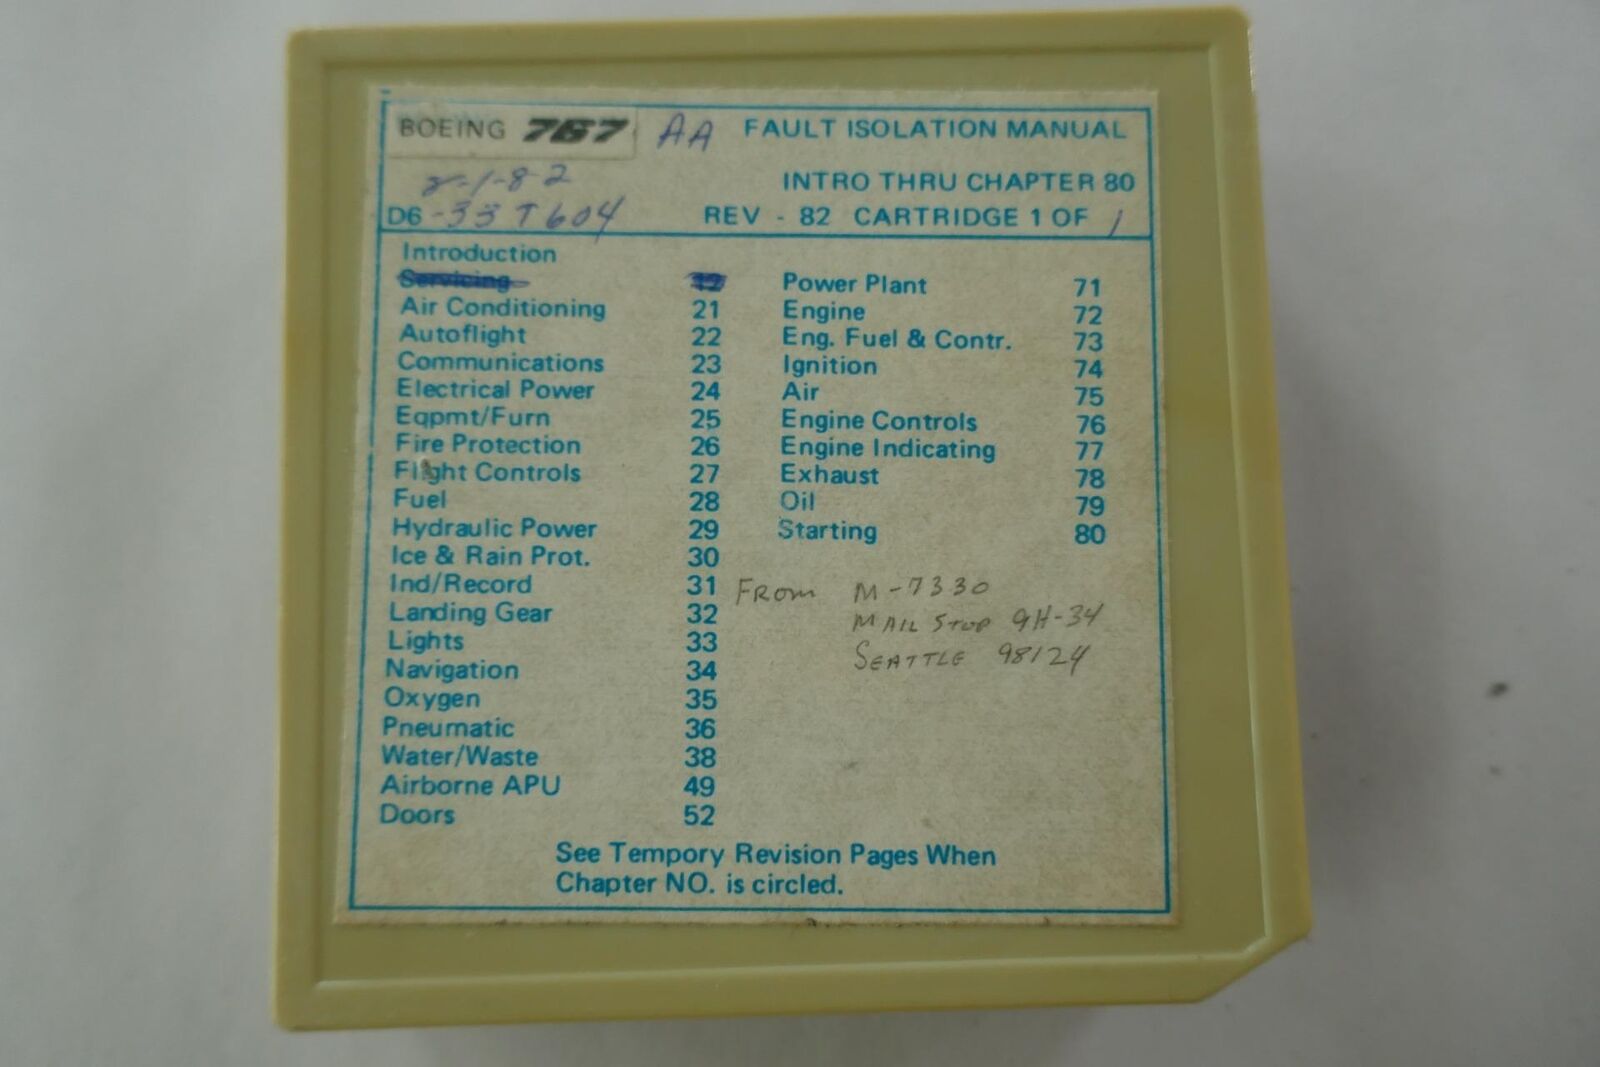 Vintage Computer Tape Cartridge Boeing 767 Fault Isolation Manual